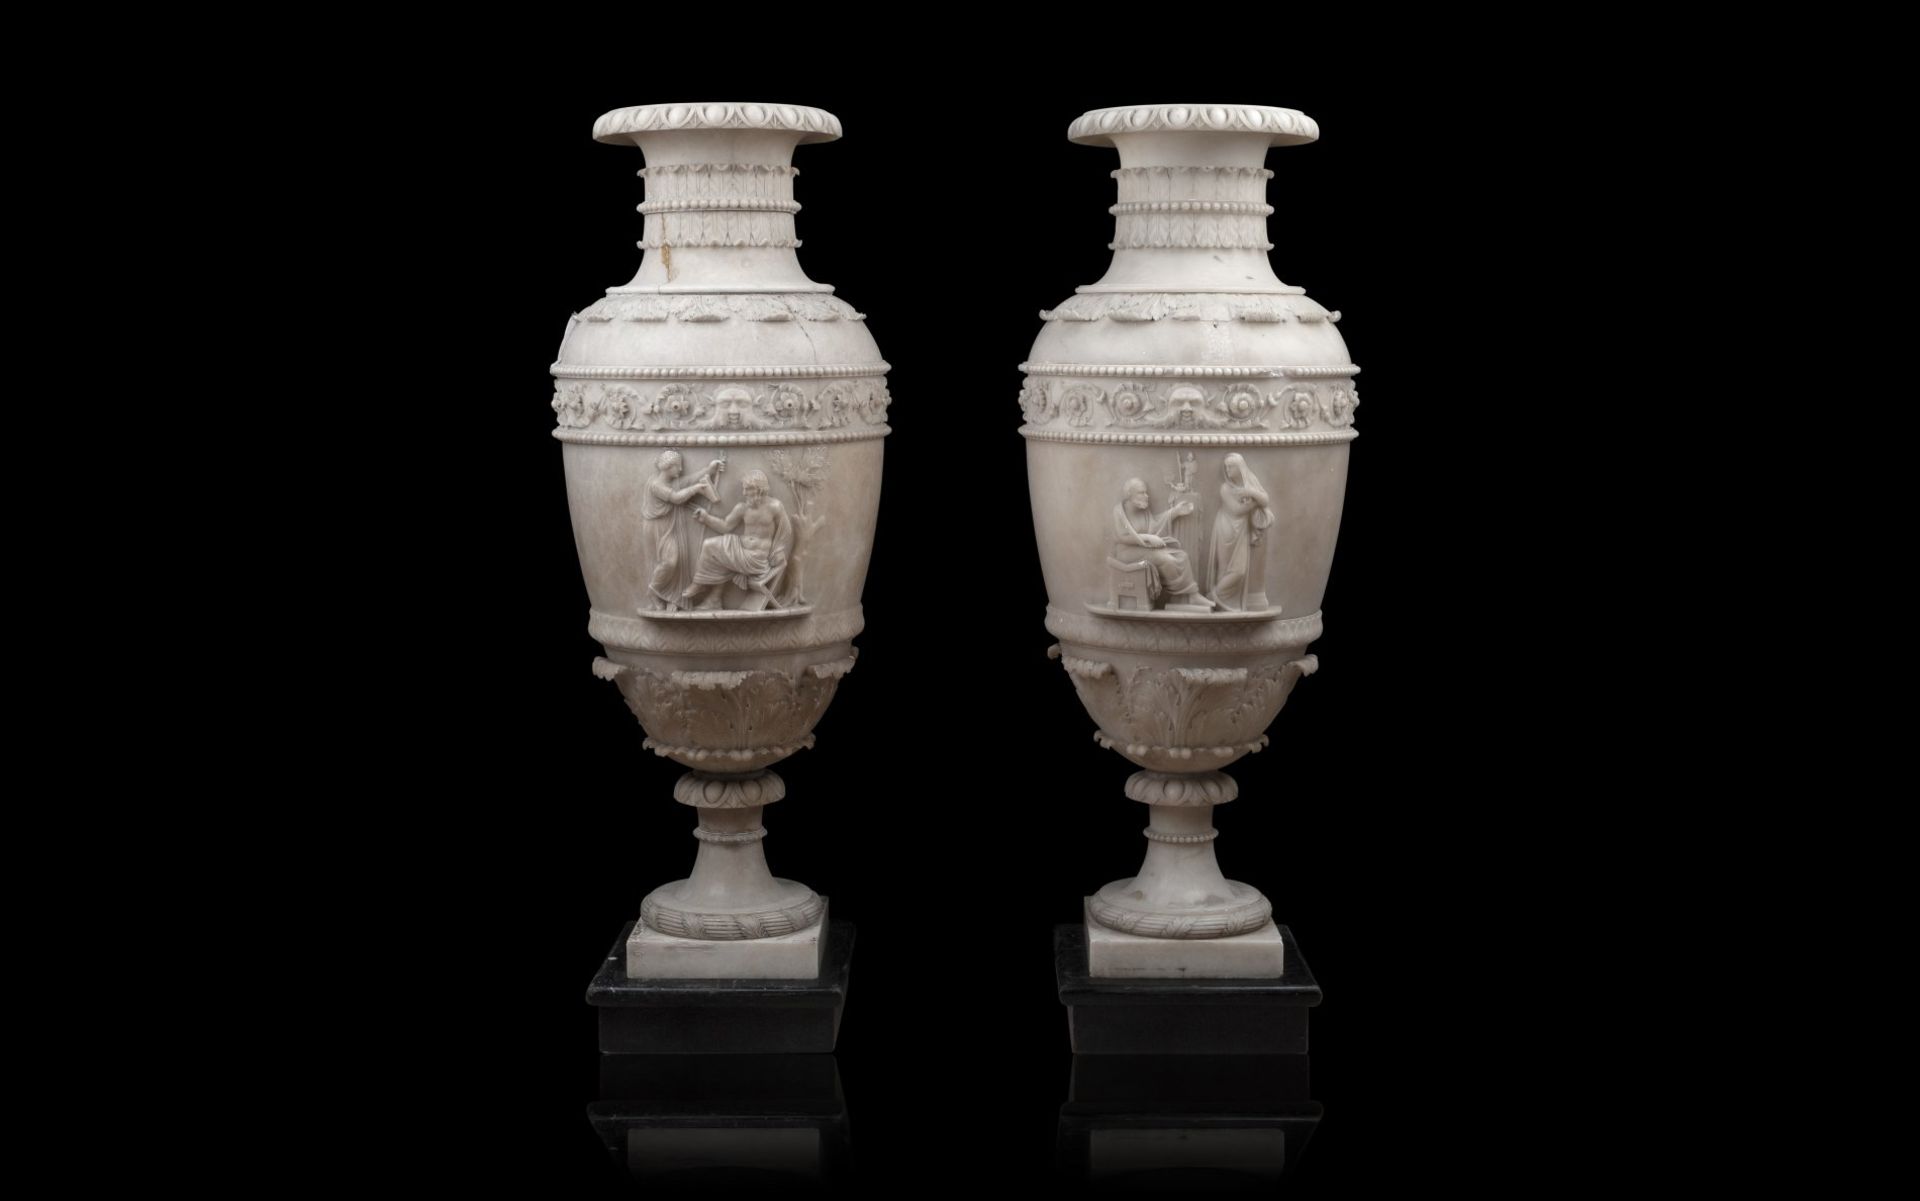 A VERY LARGE PAIR OF 19TH CENTURY ITALIAN ALABASTER FLOOR STANDING VASES